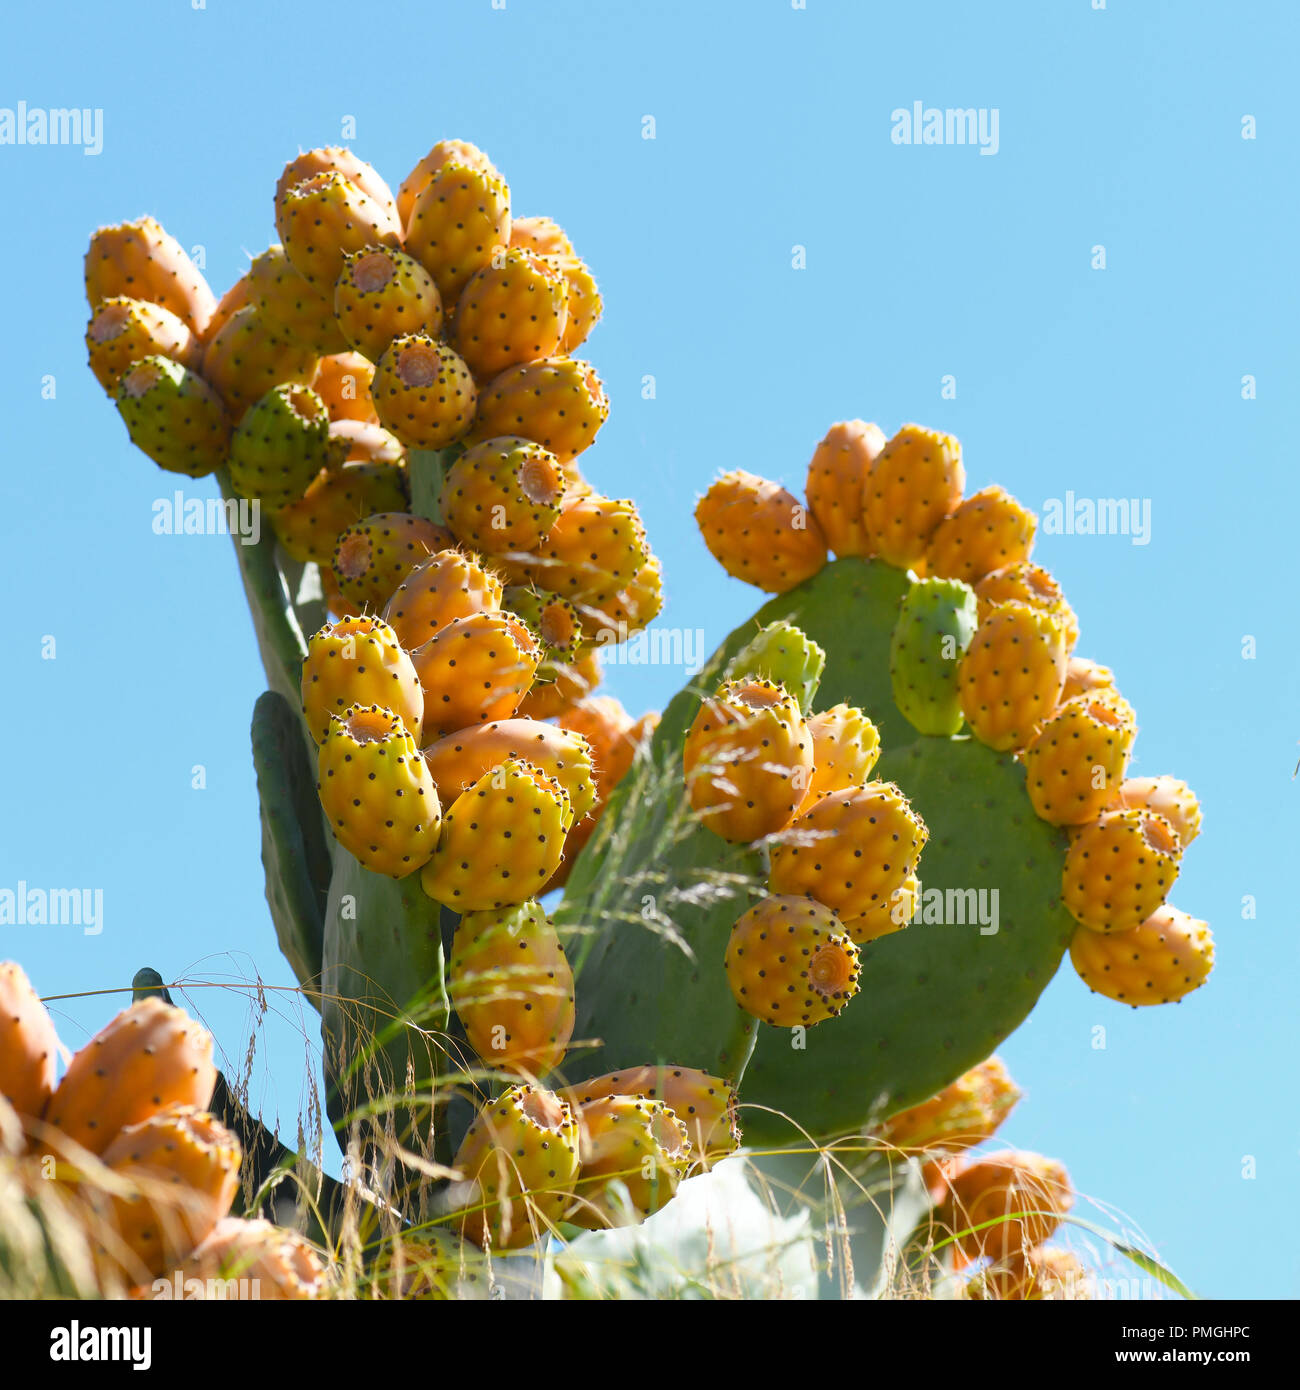 Prickly pear cactus covered in fruit, square image with a plan blue sky background for text over lay selective focus Stock Photo